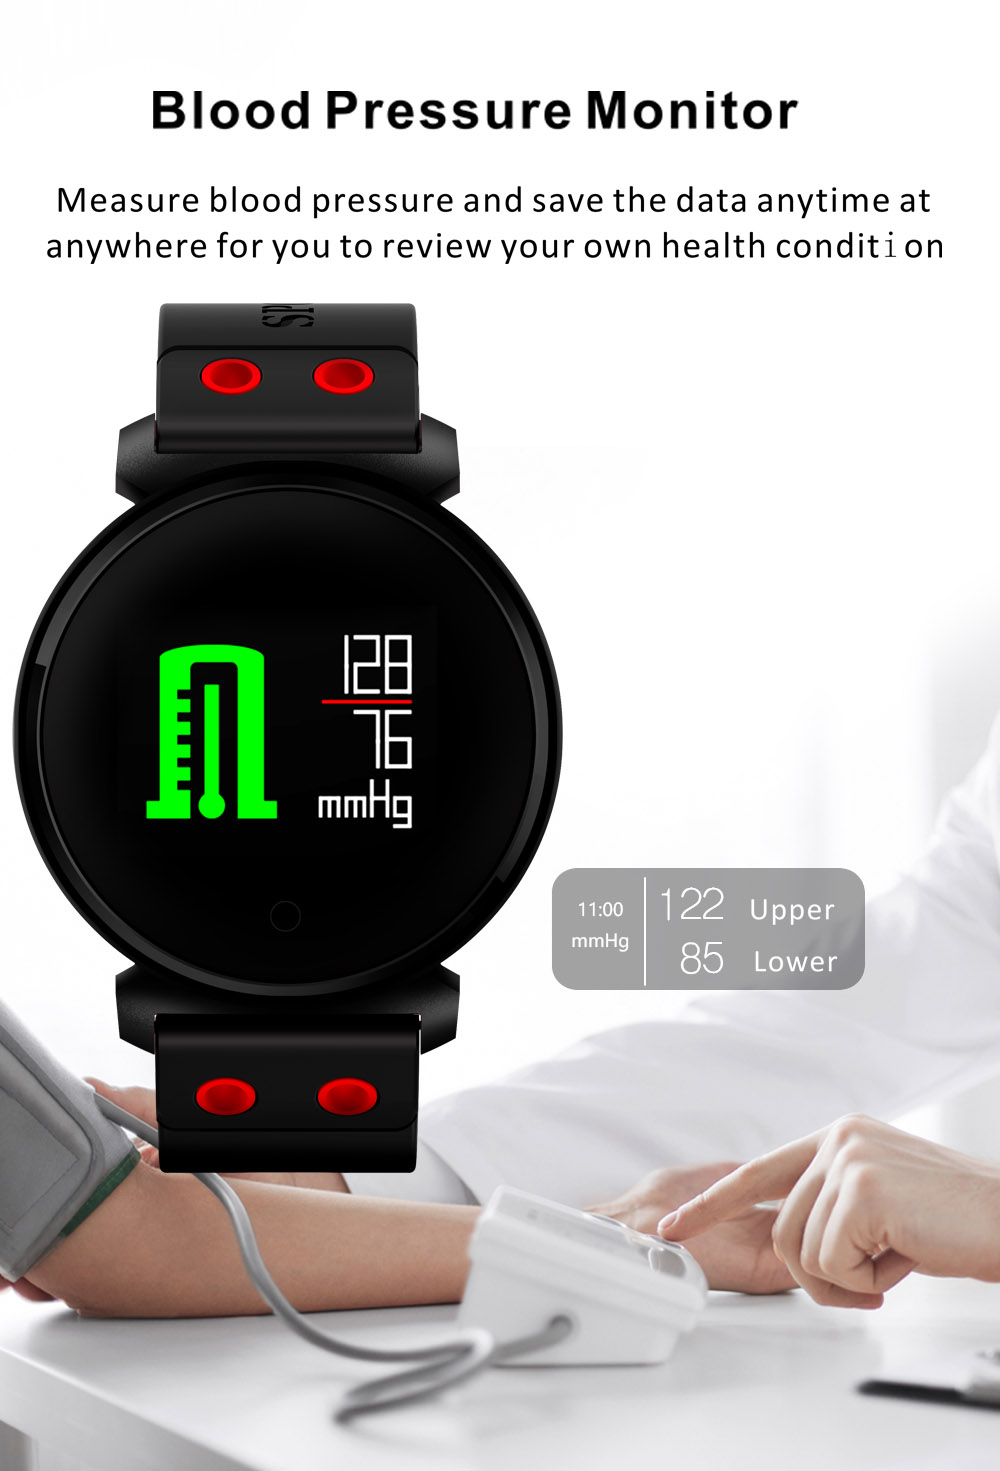 CACGO K2 Bluetooth 4.0 Nordic NRF52832 Chip Sleep / Heart Rate / Blood Pressure / Blood Oxygen / Calories Monitor Remote Camera Smart Watch for iOS / Android Phones